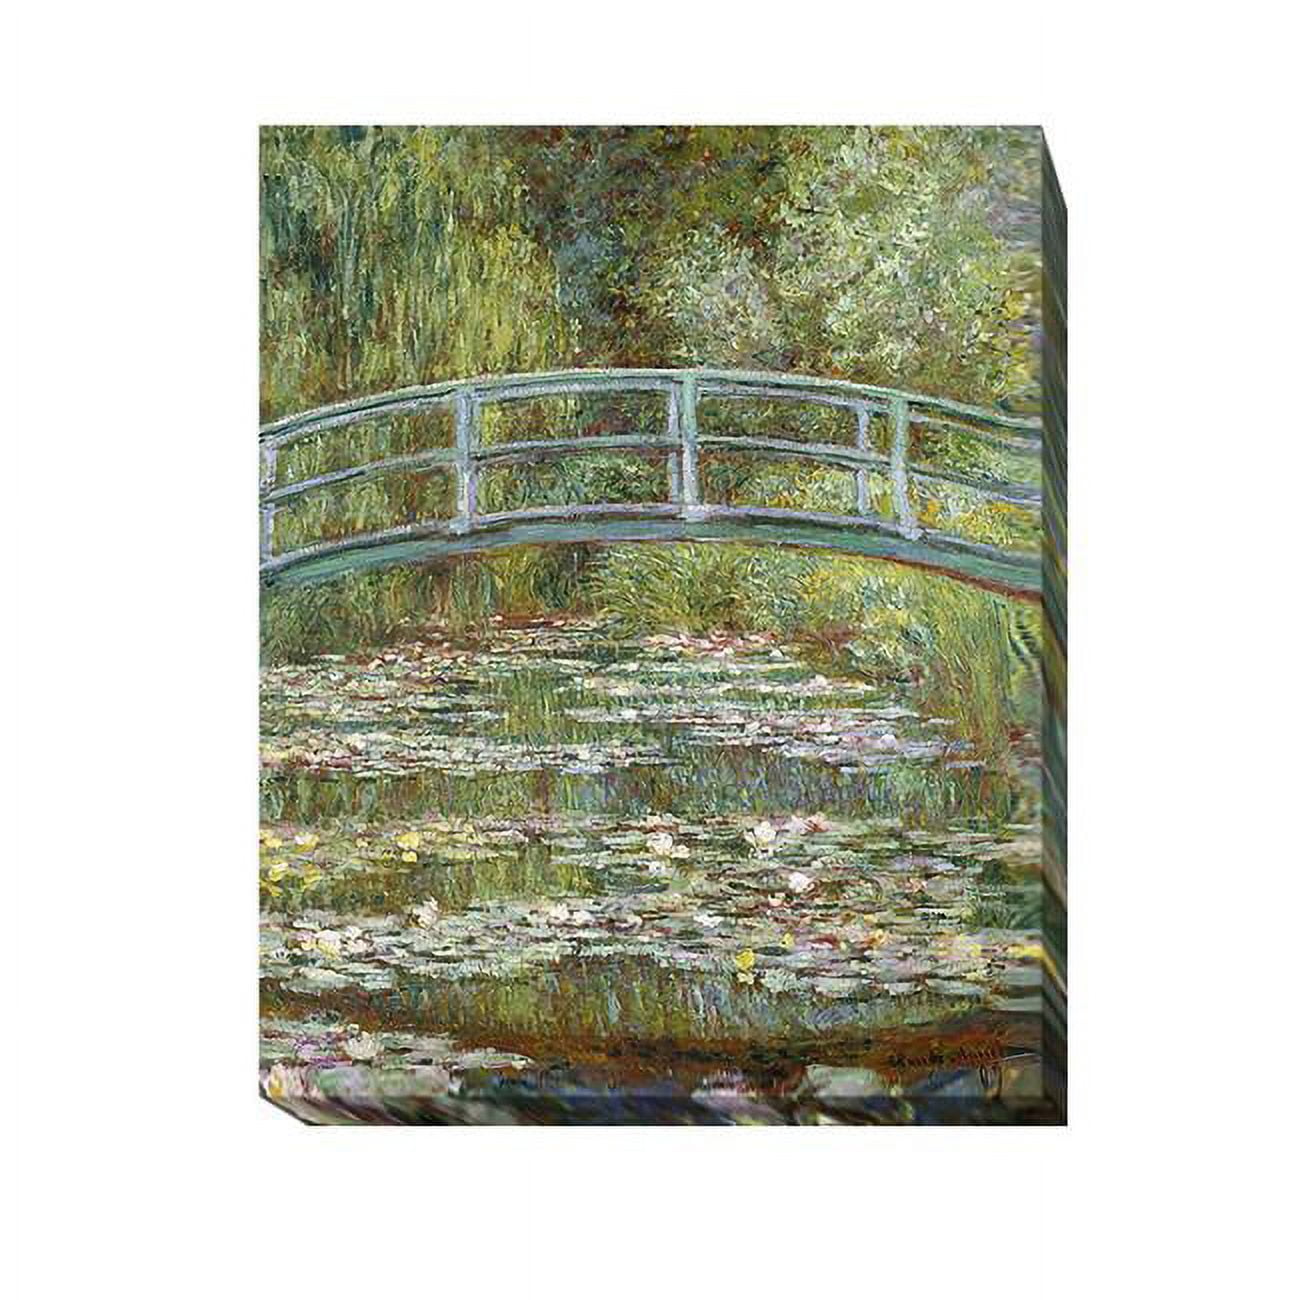 1215am799ig Pond Of Water Lilies By Claude Monet Premium Gallery-wrapped Canvas Giclee Art - 12 X 15 X 1.5 In.